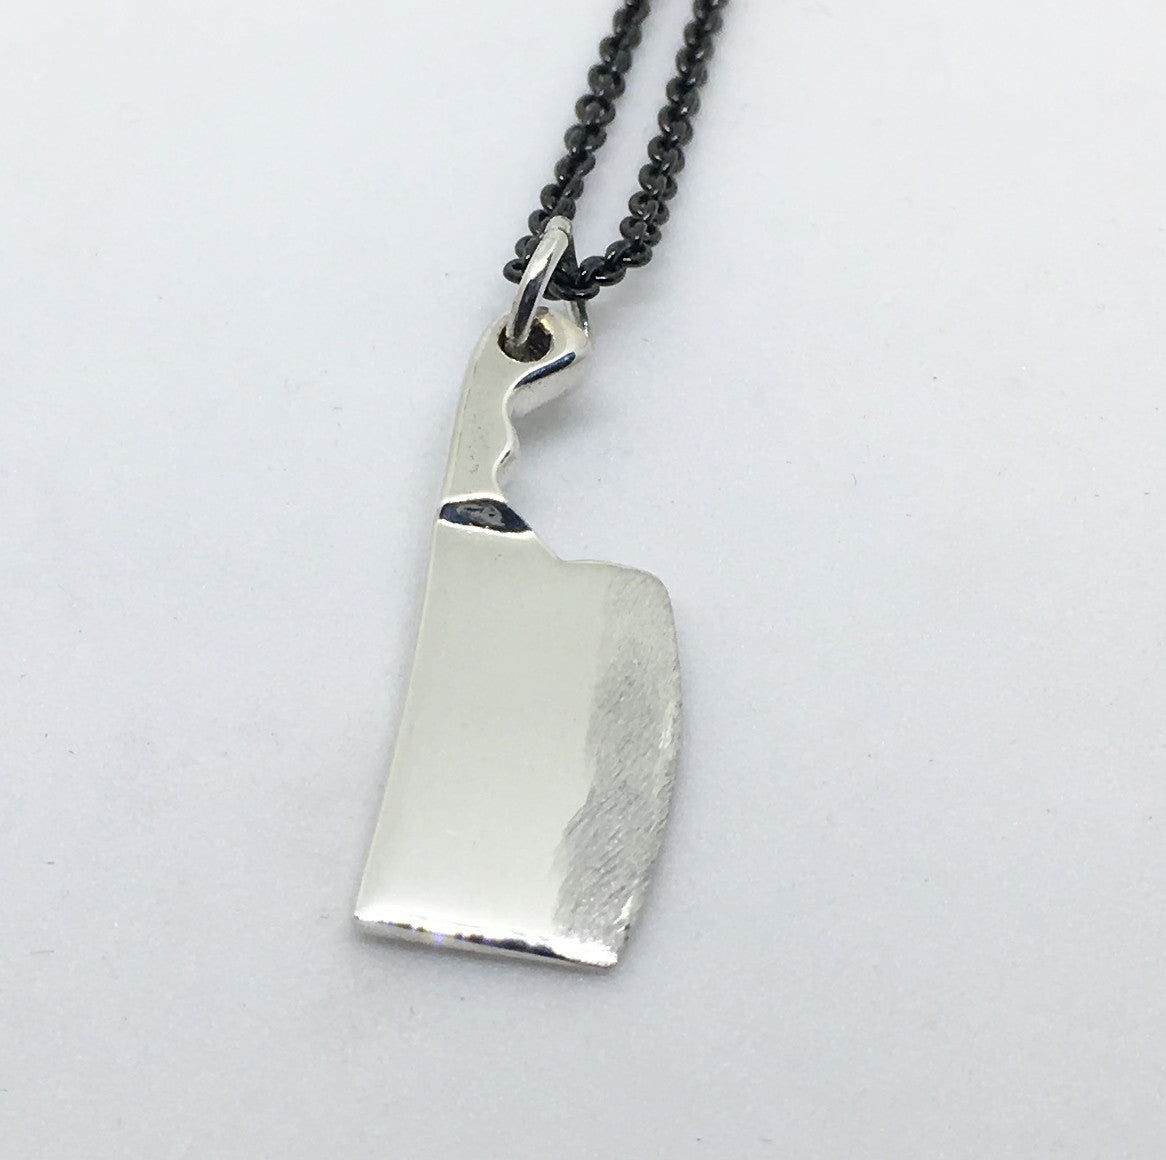 Chef Cleaver Pendant Necklace with Black Silver Chain